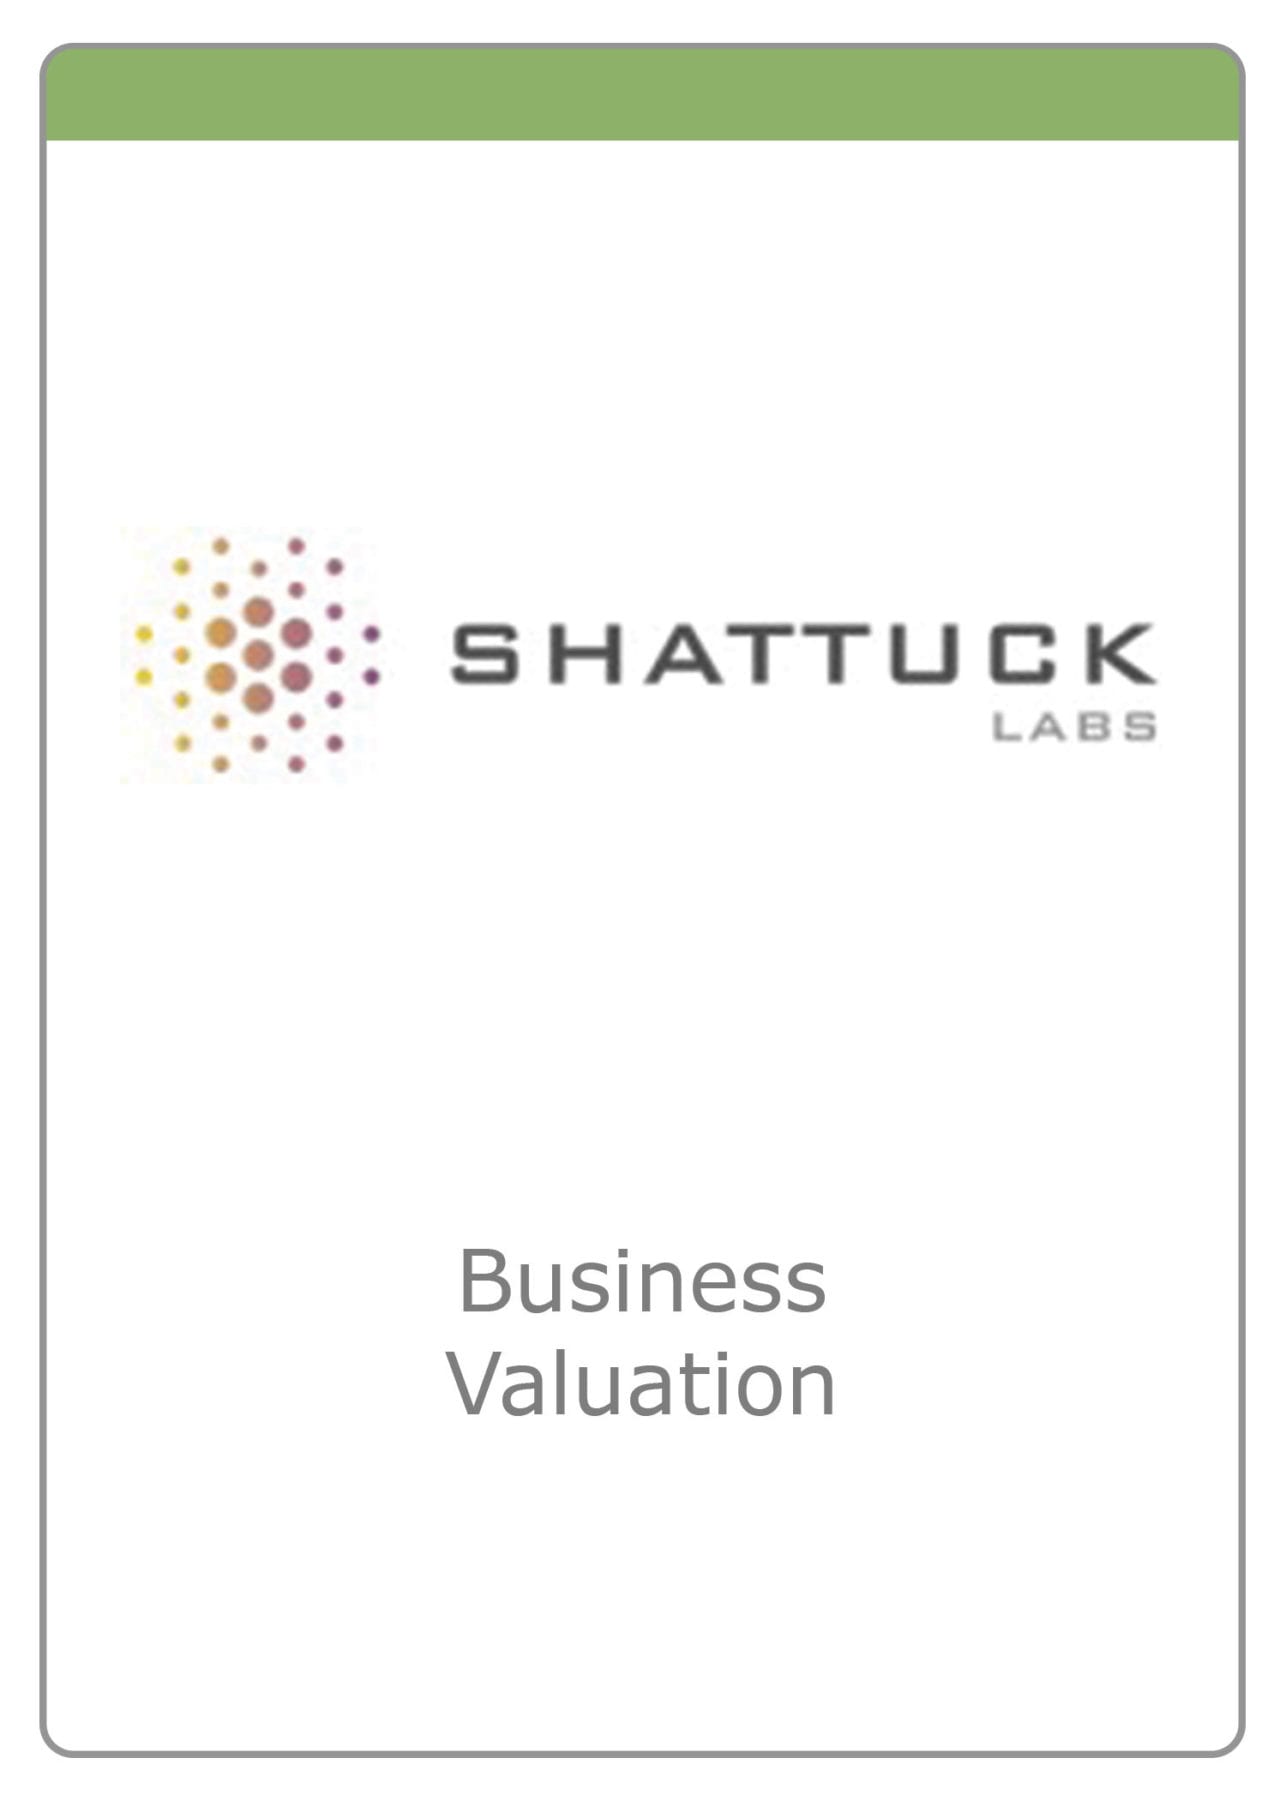 Shattuck Labs - The McLean Group